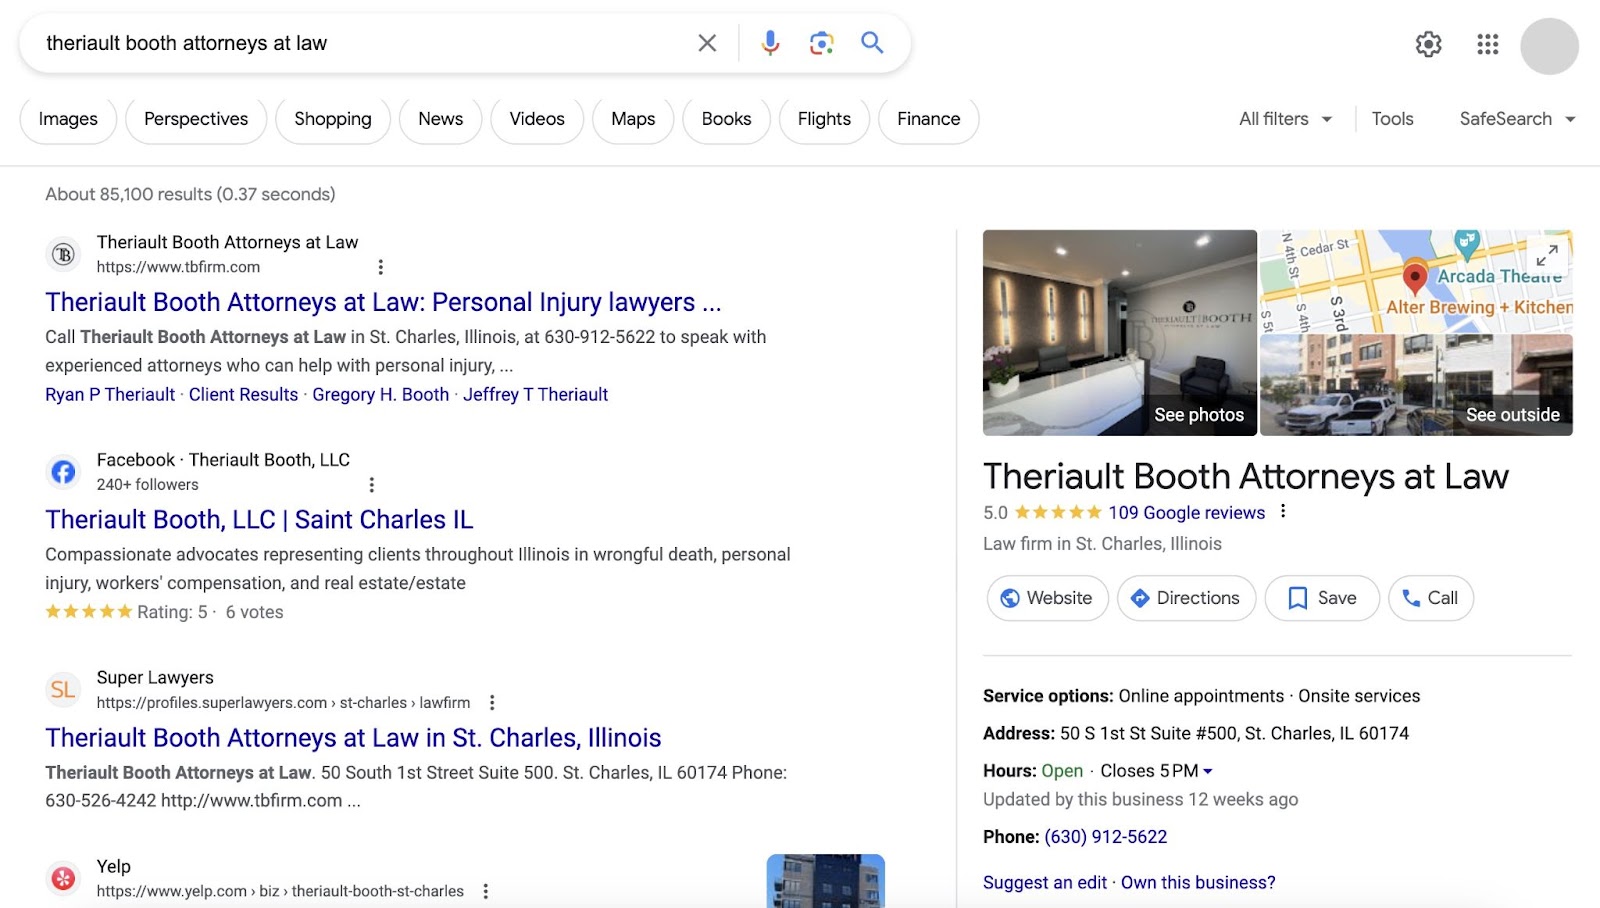 Google's results for "thelault booth attorneys at law"